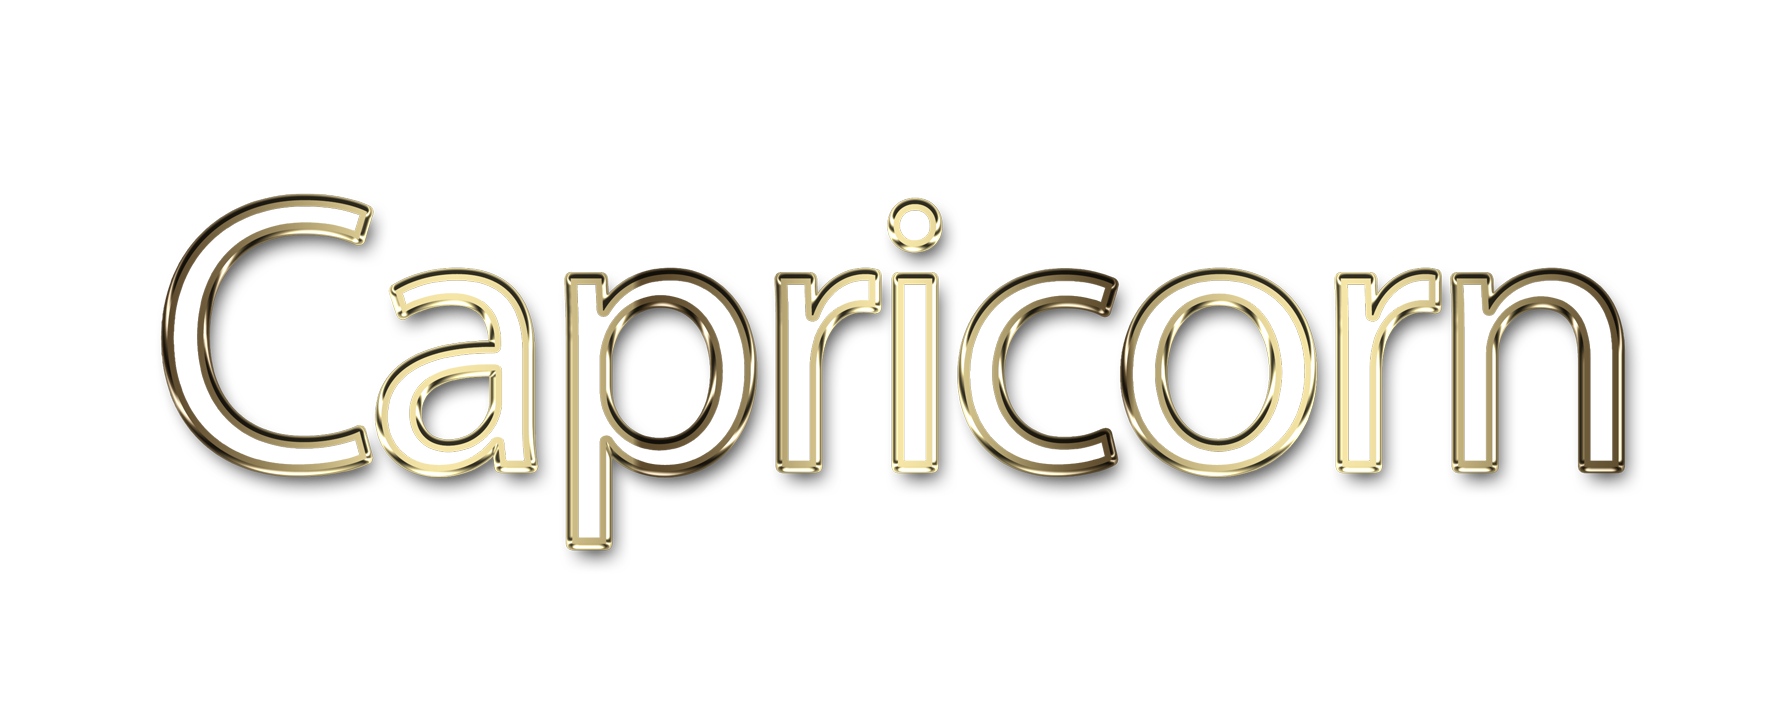 Capricorn png, word Capricorn png, Capricorn word png, Capricorn text png, Capricorn letters png, Capricorn word art typography PNG images, transparent png